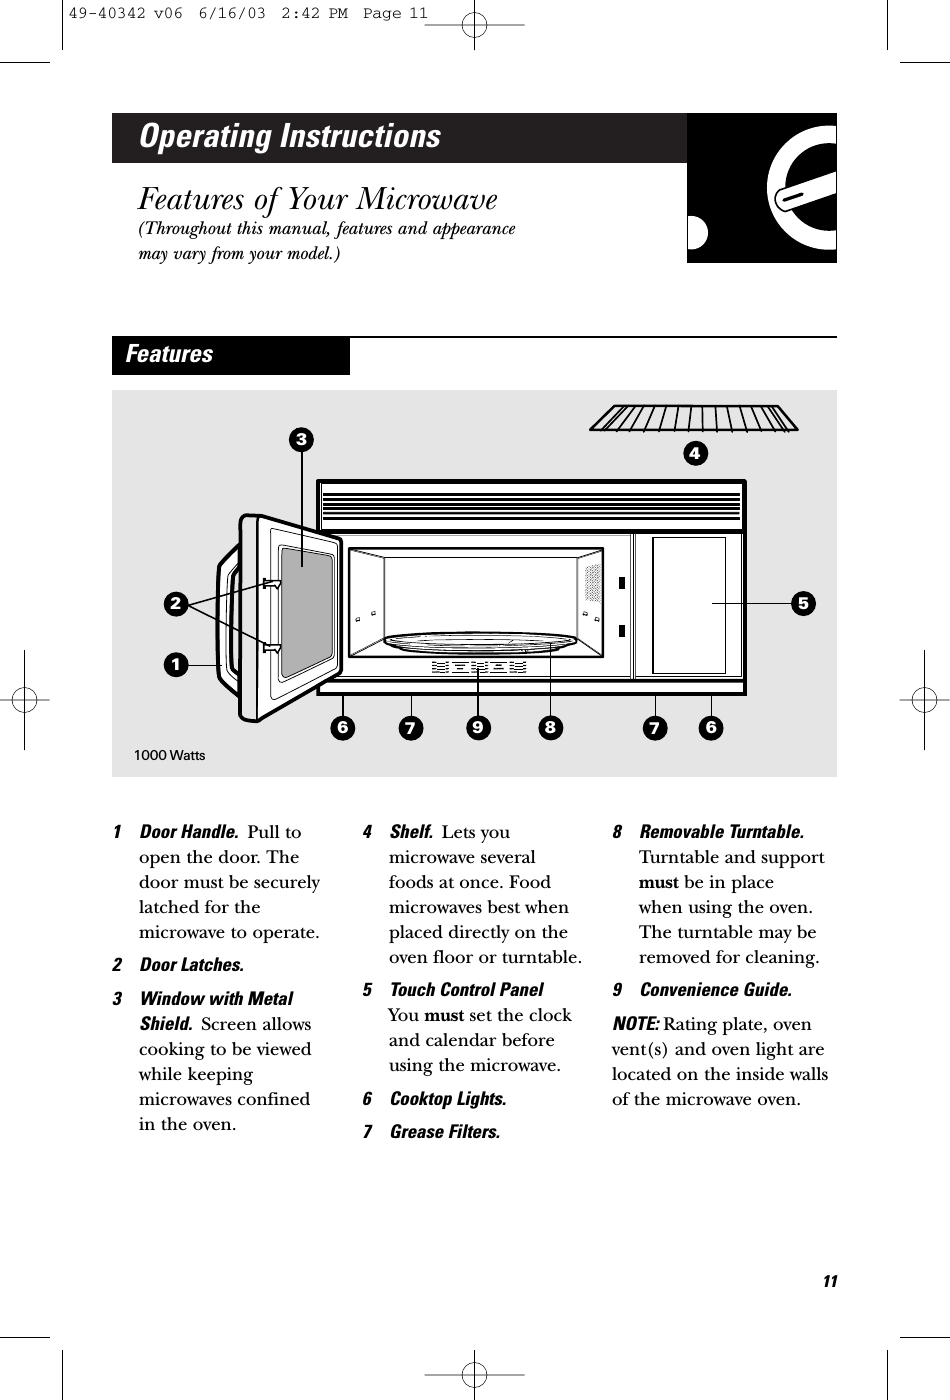 Operating InstructionsFeatures of Your Microwave(Throughout this manual, features and appearancemay vary from your model.)1 Door Handle.  Pull toopen the door. Thedoor must be securelylatched for themicrowave to operate.2 Door Latches.3 Window with MetalShield.  Screen allowscooking to be viewedwhile keepingmicrowaves confined in the oven.4 Shelf.  Lets youmicrowave several foods at once. Foodmicrowaves best whenplaced directly on theoven floor or turntable. 5 Touch Control Panel You must set the clockand calendar beforeusing the microwave. 6 Cooktop Lights.7 Grease Filters.8 Removable Turntable.Turntable and supportmust be in place when using the oven.The turntable may beremoved for cleaning.9 Convenience Guide.NOTE: Rating plate, ovenvent(s) and oven light arelocated on the inside wallsof the microwave oven.Features36679811741000 Watts12549-40342 v06  6/16/03  2:42 PM  Page 11